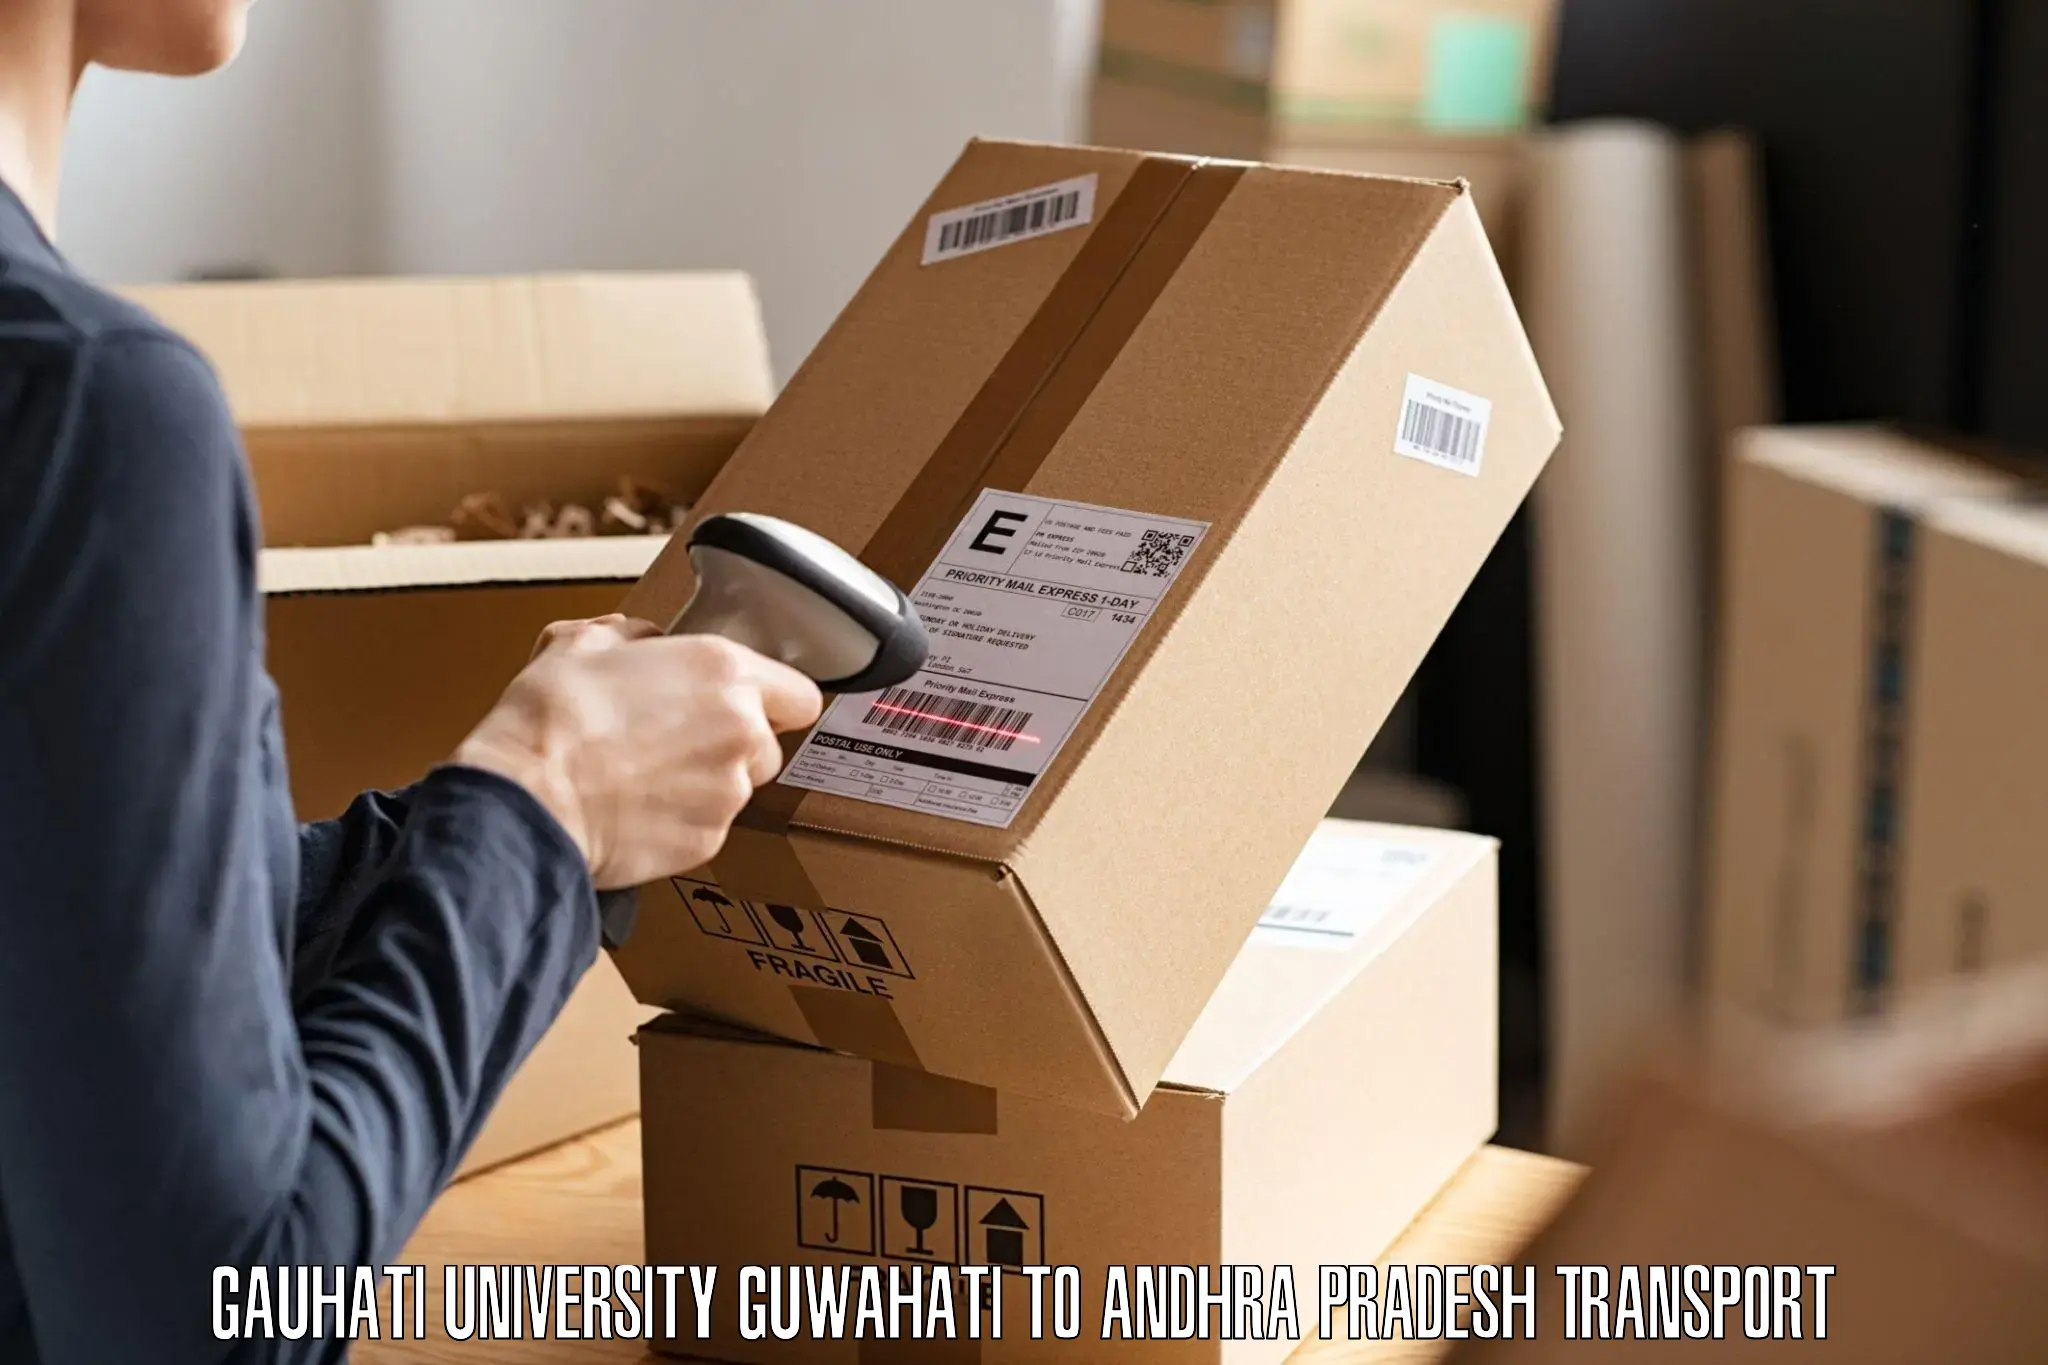 Package delivery services in Gauhati University Guwahati to Chagalamarri